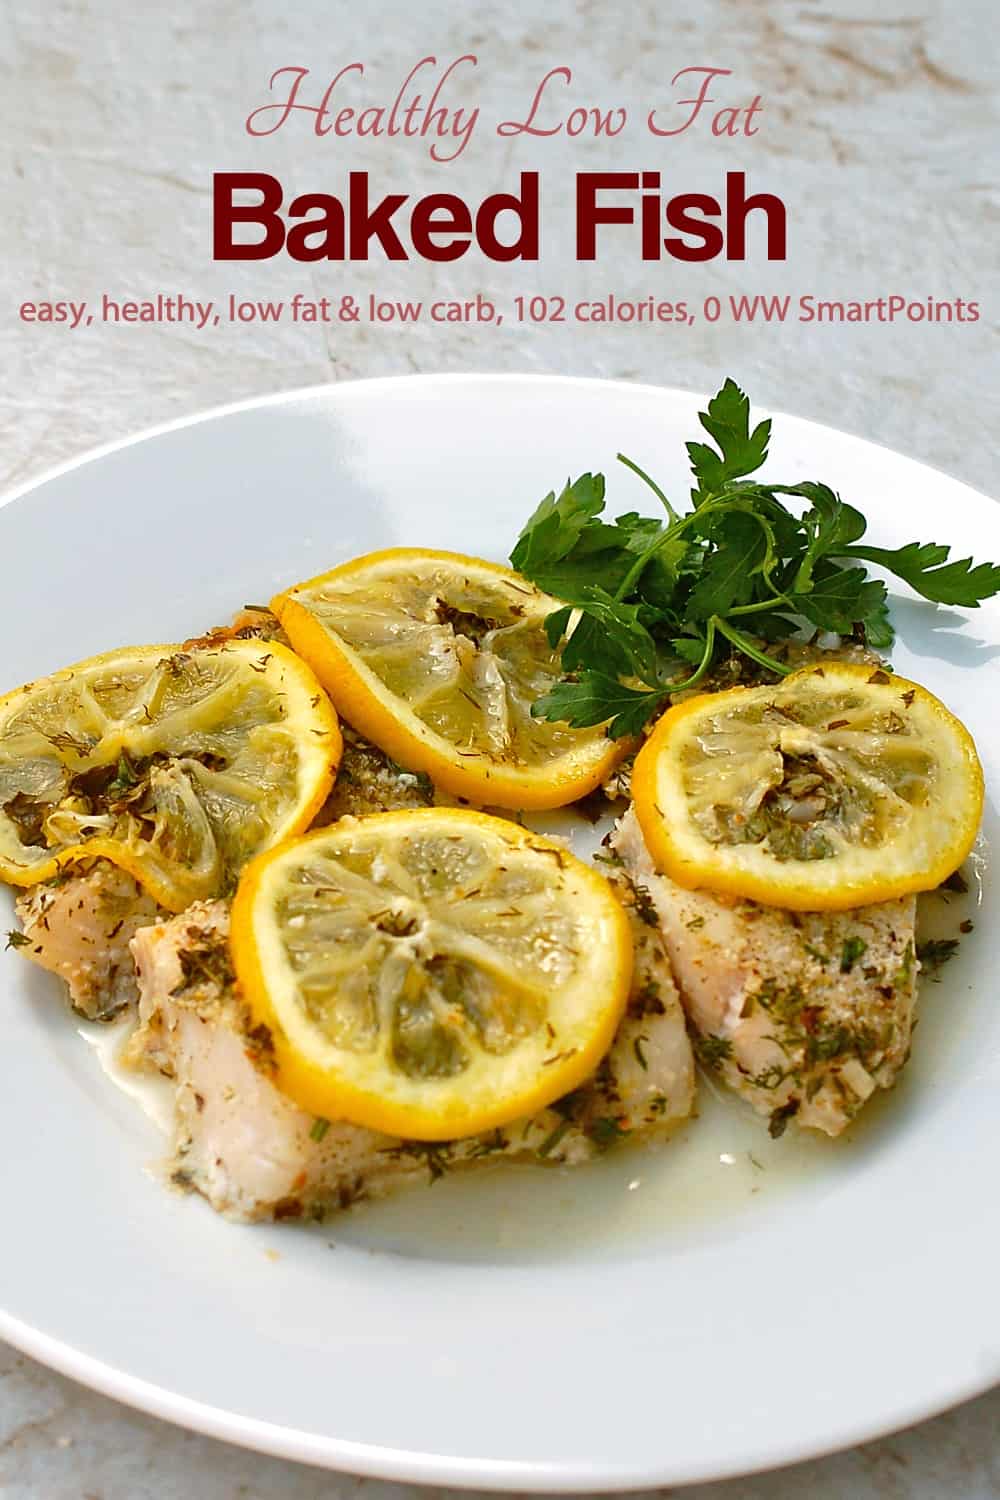 Baked fish topped with lemon slices and fresh herbs on a white plate